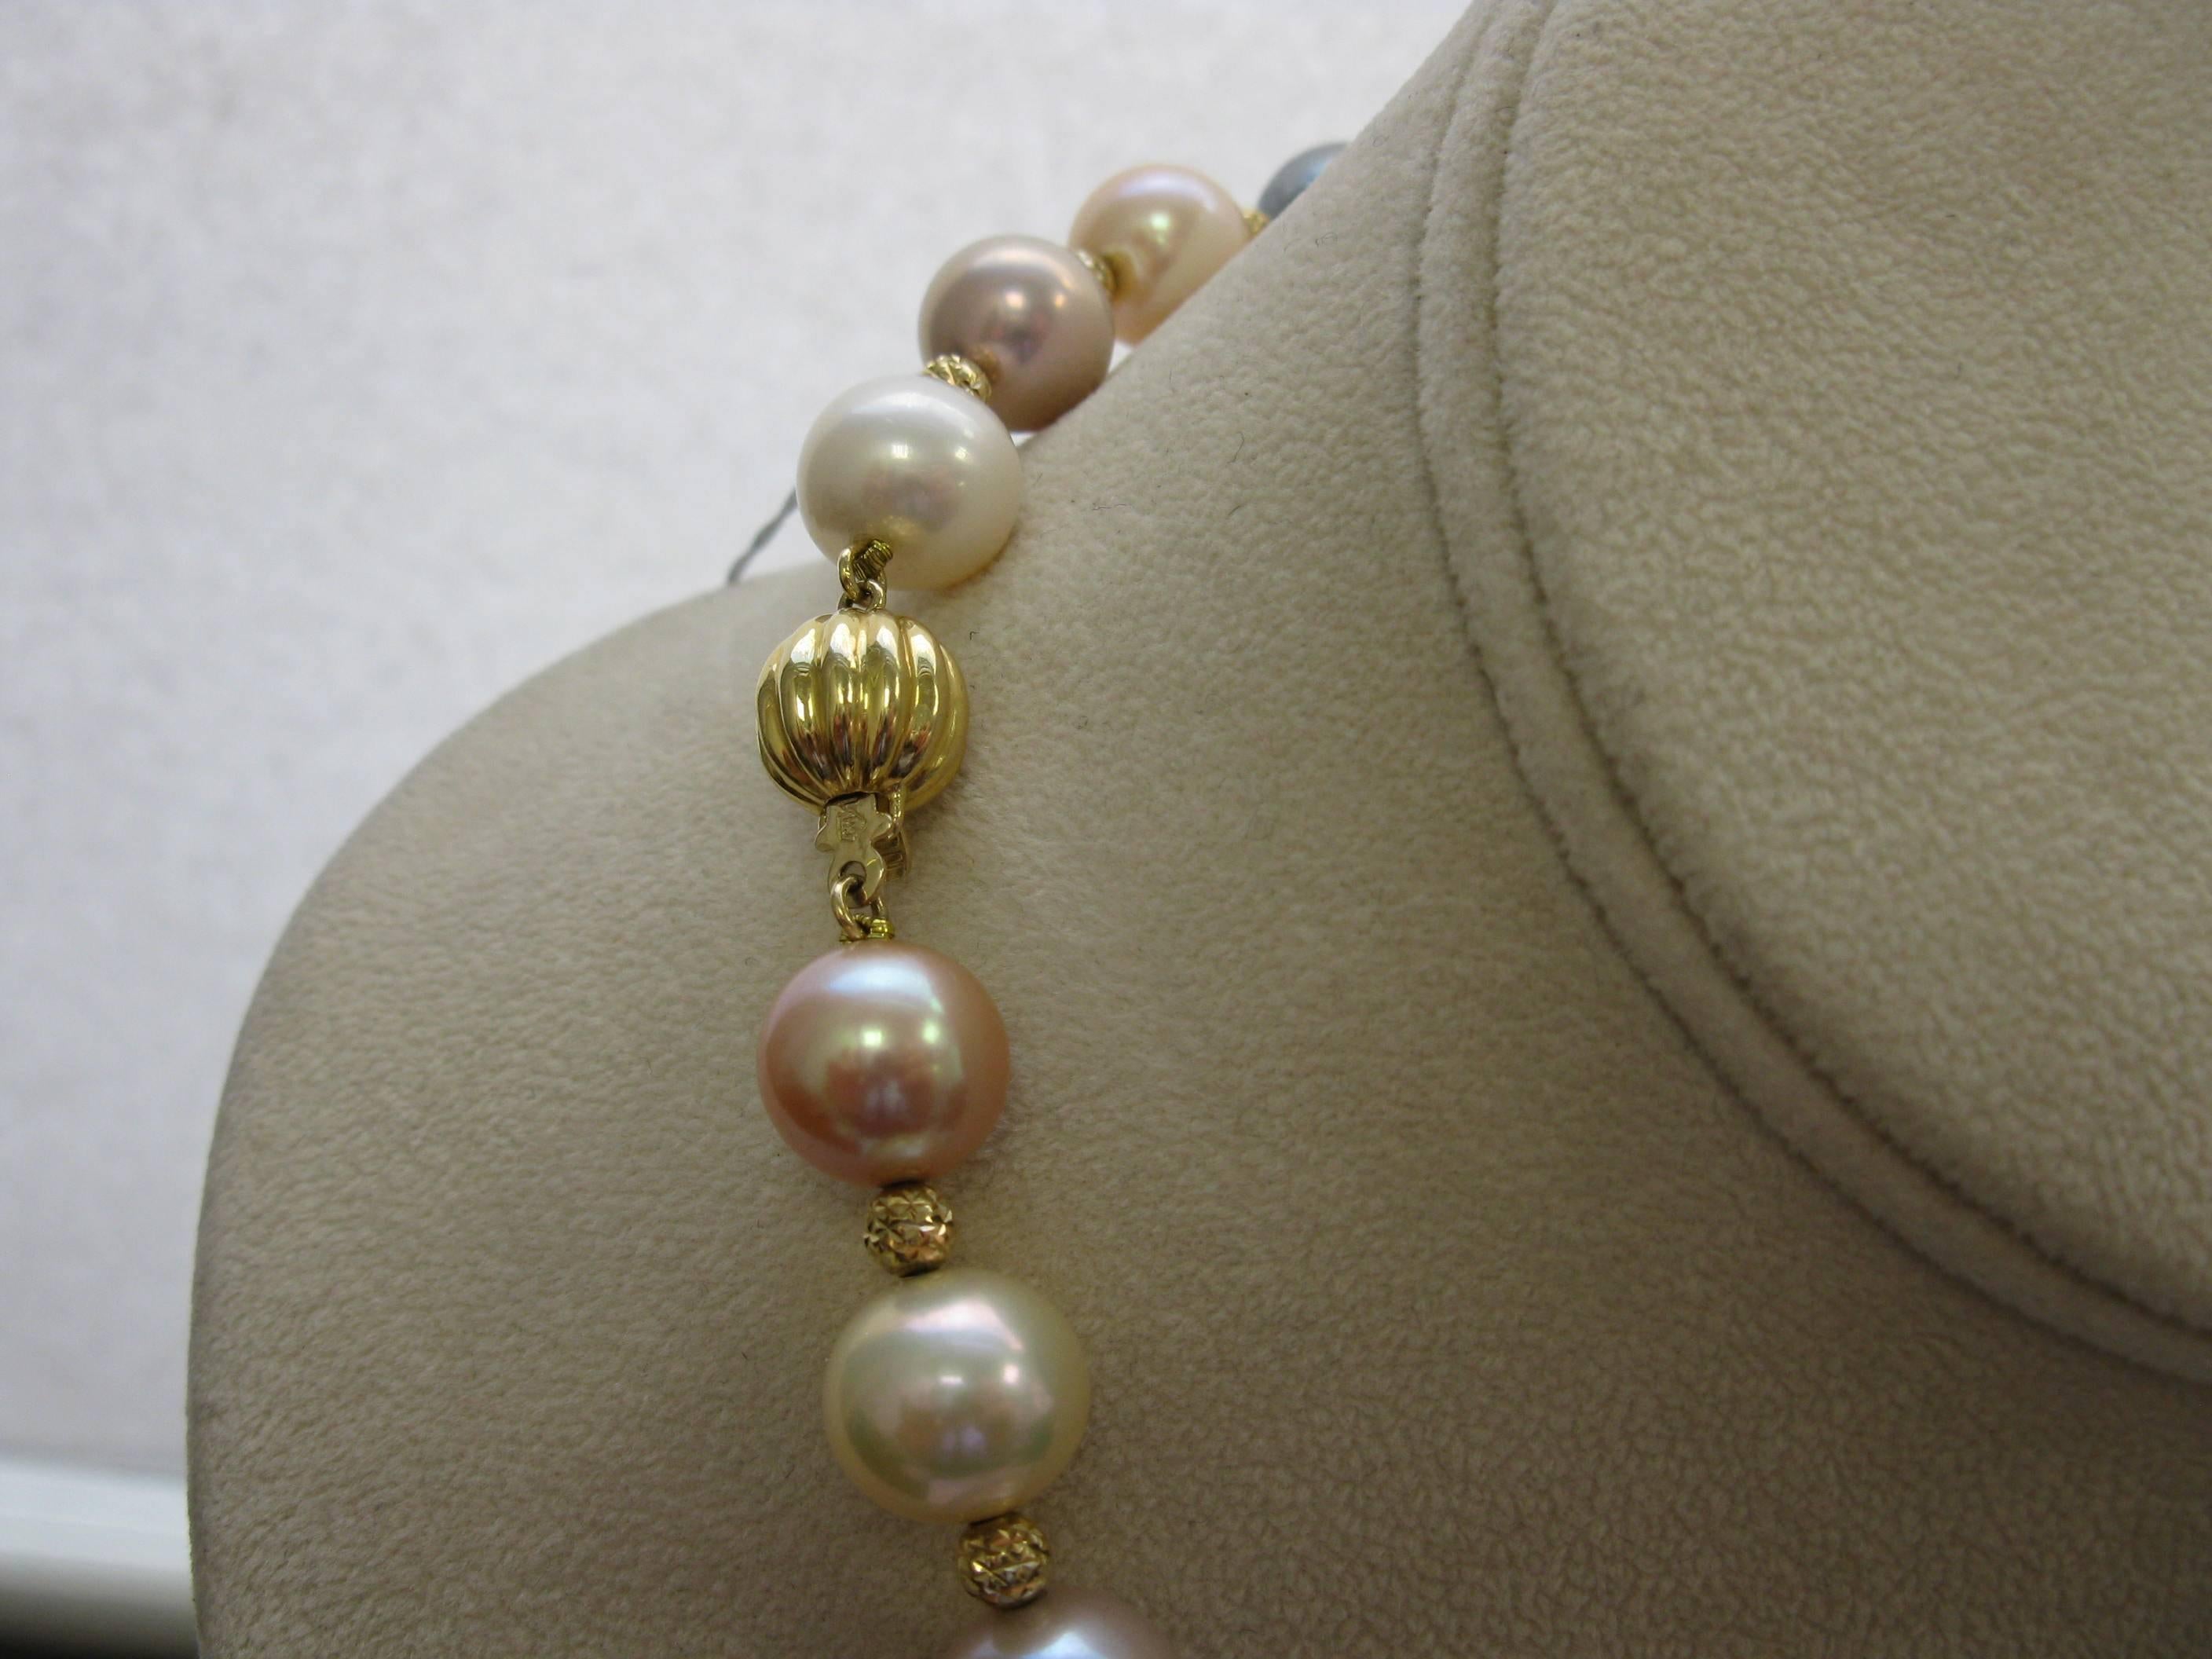 These gorgeous natural colored pearls are slightly graduated. The largest is 14 mm and the smallest, in the back , is 11 mm. Top quality luster. The beads in between are 18 kt gold faceted beads. The clasp is also 18 kt gold and is about 10 mm